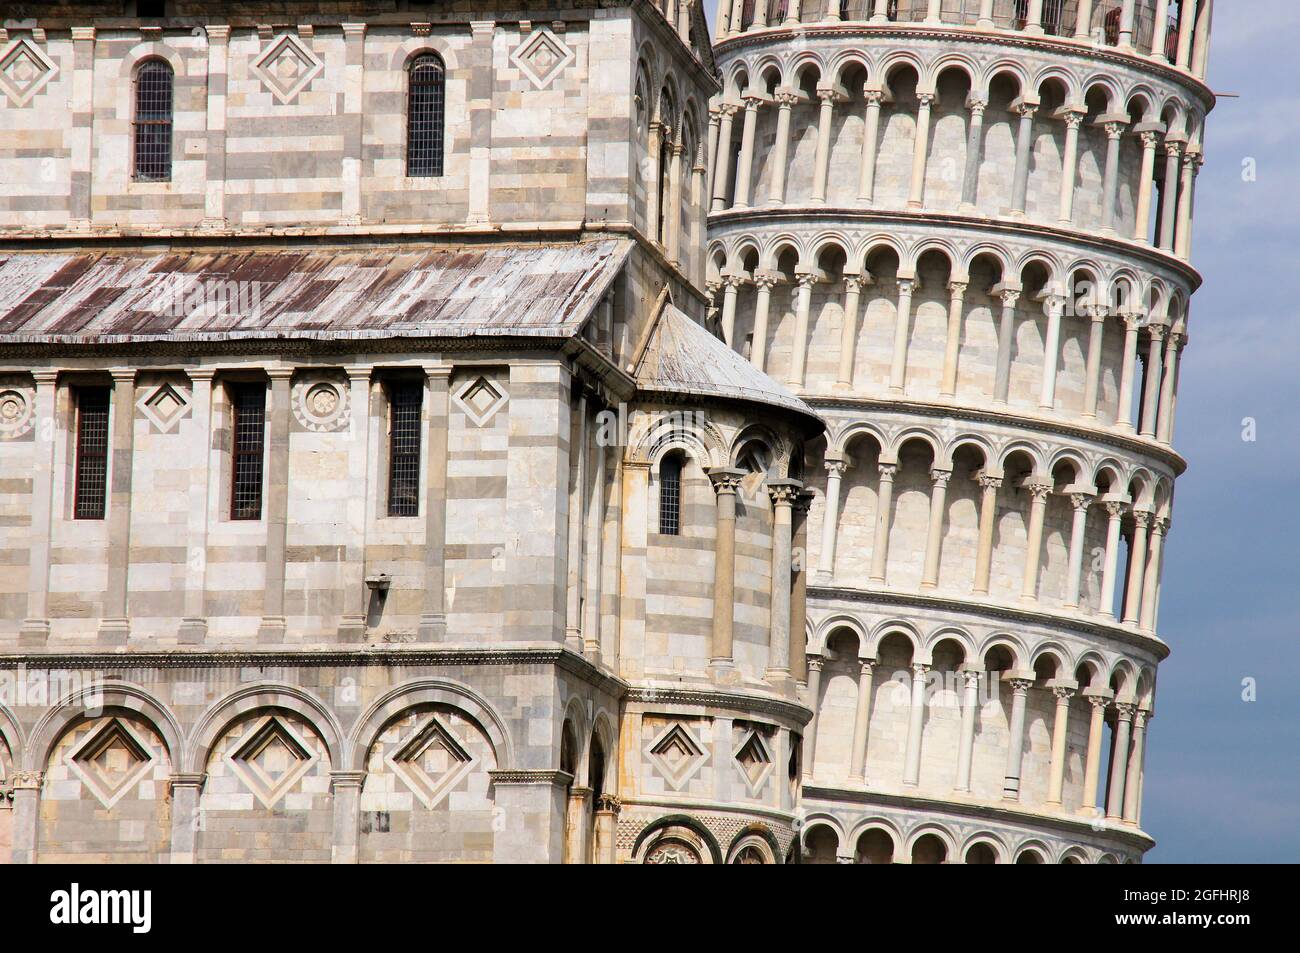 Close up view of the Cathedral and leaning tower of Pisa, Tuscany, Italy Stock Photo